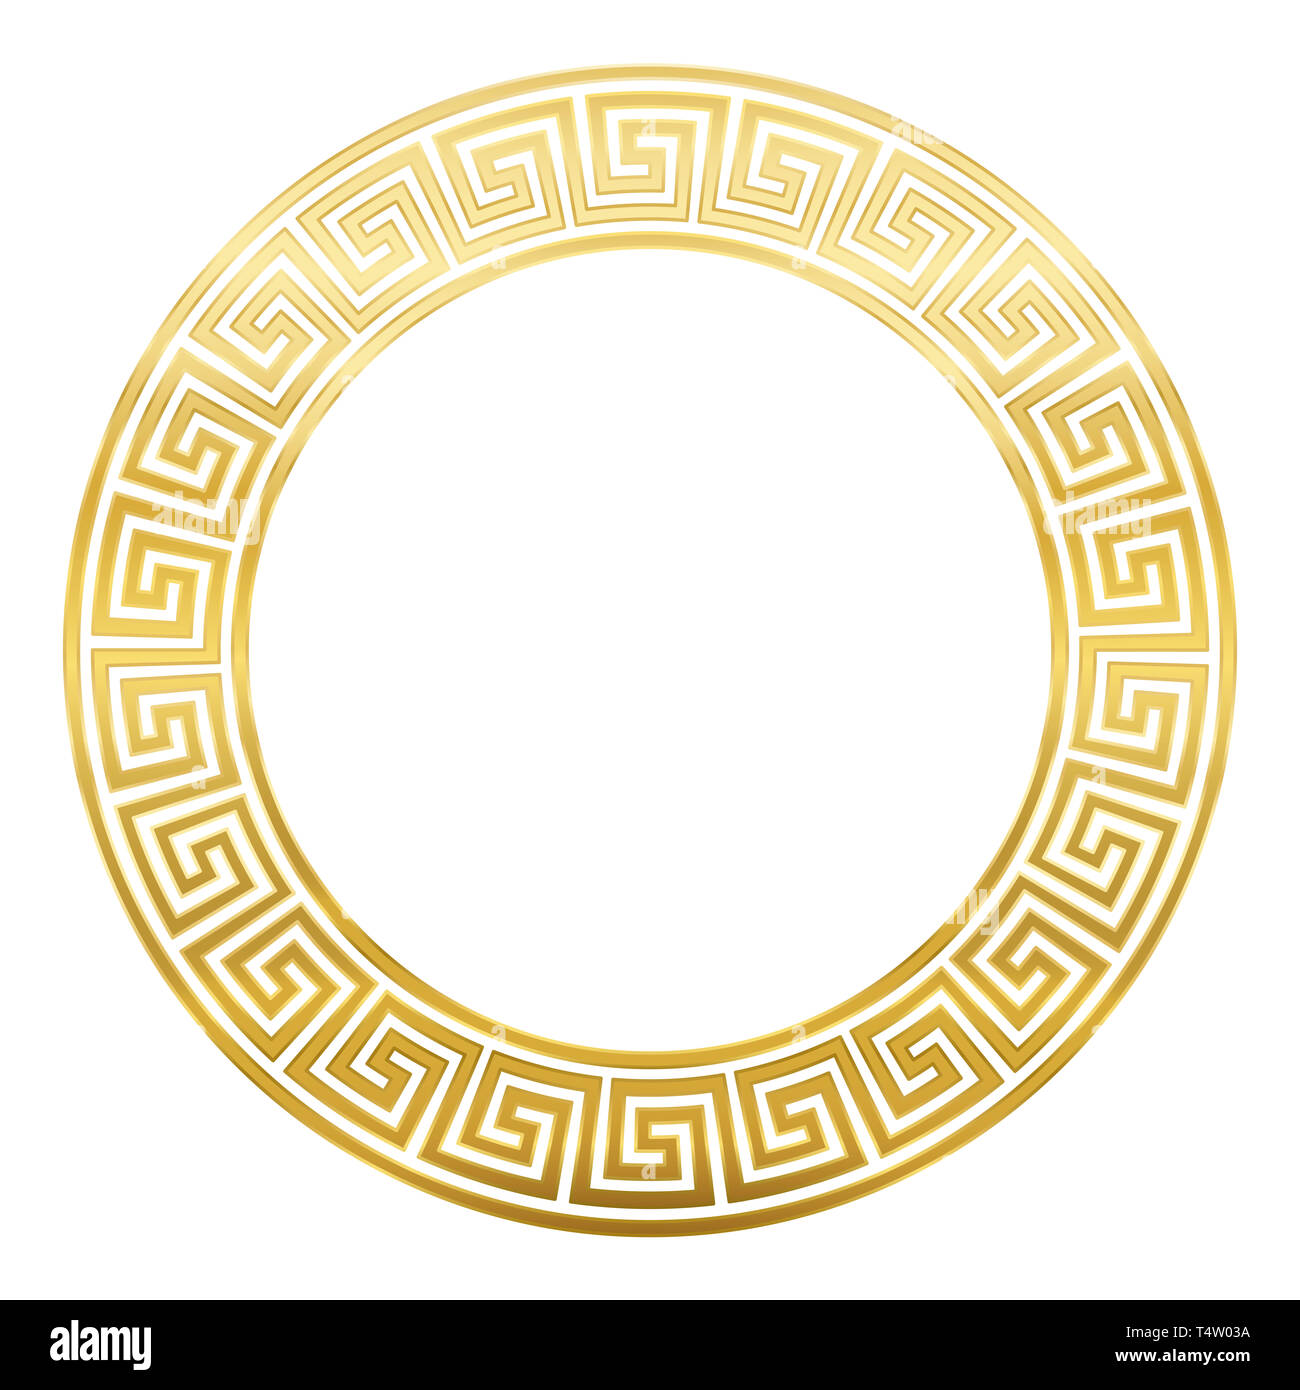 Meander design circle frame with seamless pattern. Golden Meandros, a decorative border, constructed from continuous lines. Stock Photo